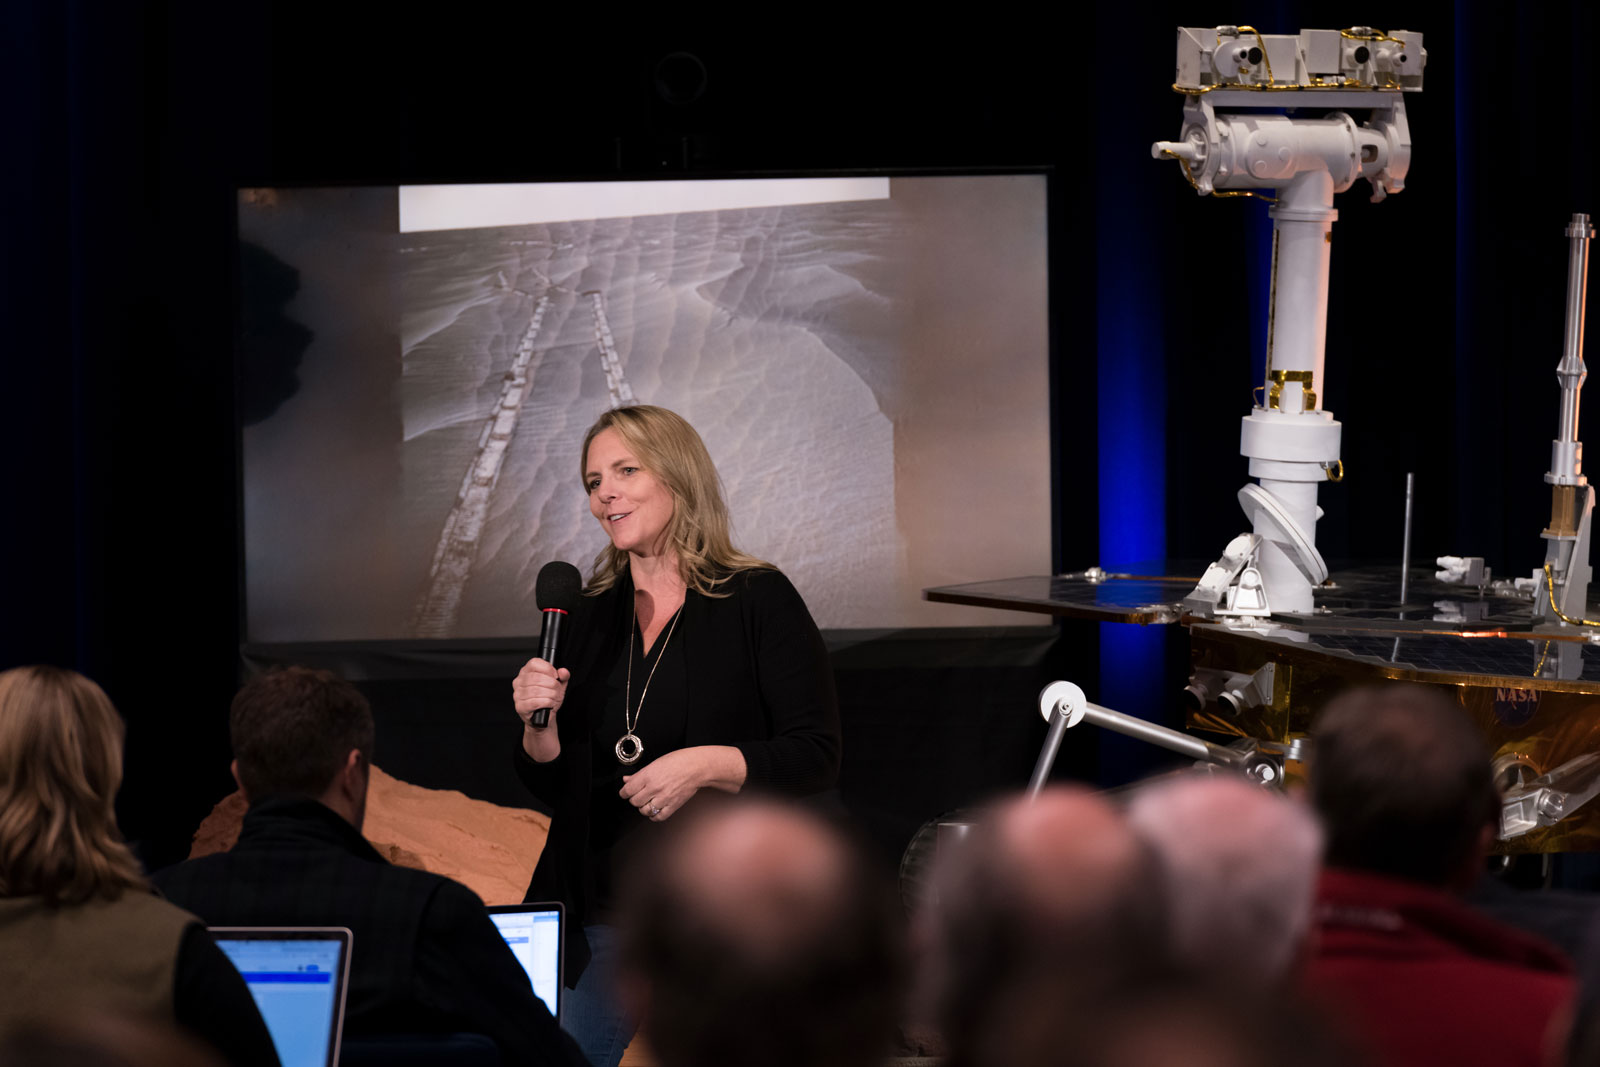 At an event celebrating the end of NASA’s Mars Exploration Rovers (MER) mission on Feb. 13, 2019, engineer Jennifer Trosper shared how working on the rovers Spirit and Opportunity taught her lessons for NASA’s next rover mission, Mars 2020.